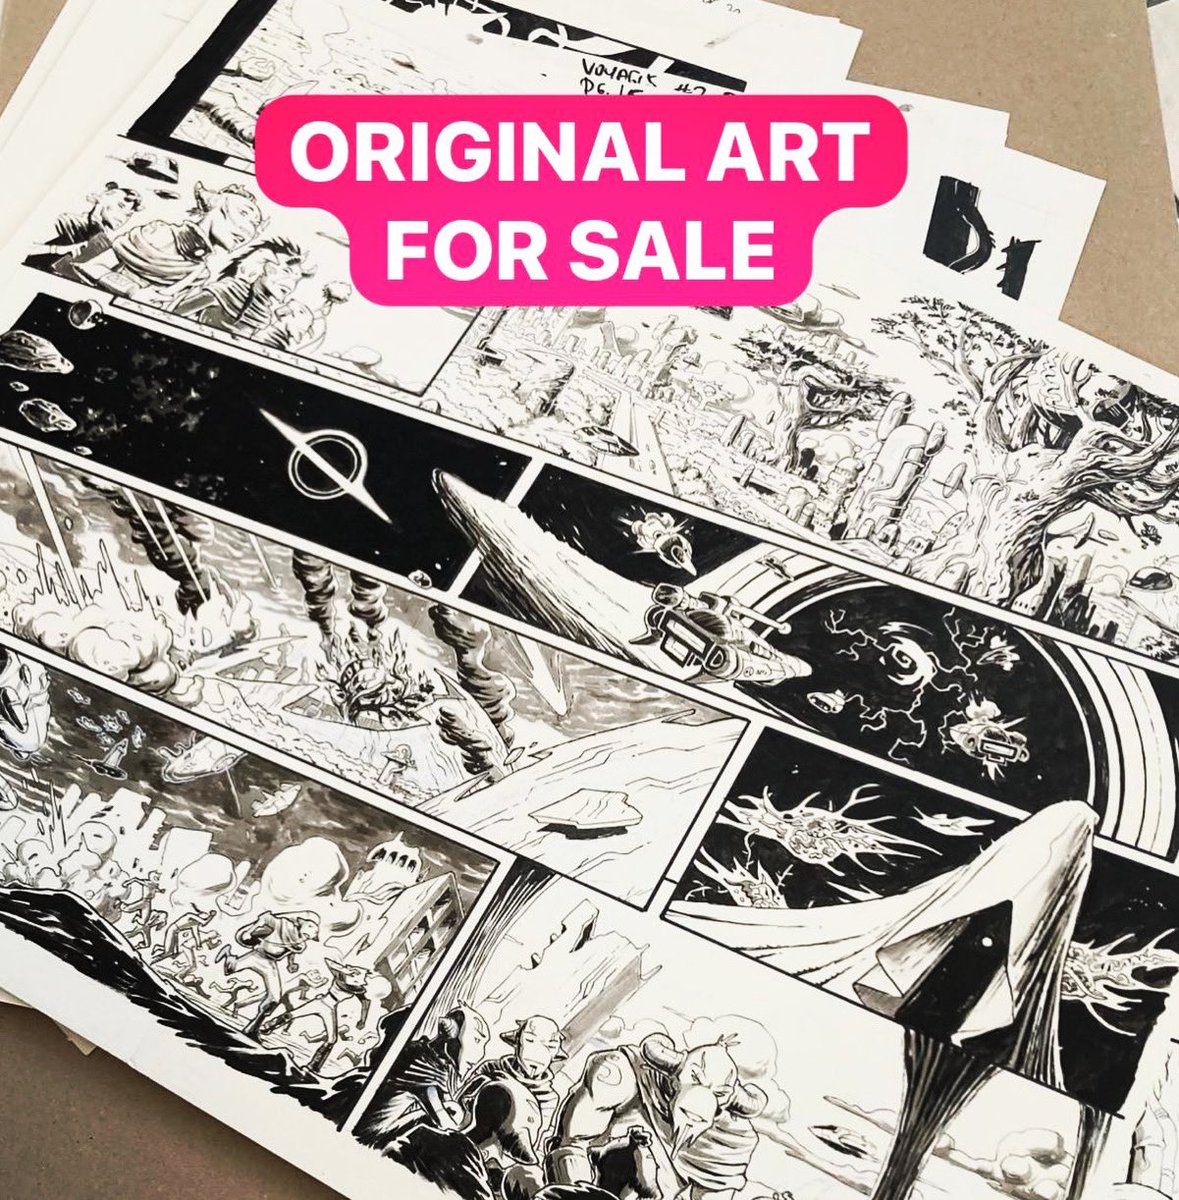 Hey folks! I put some Voyagis pages on sale. Please contact via DM if you’re interested ✌️